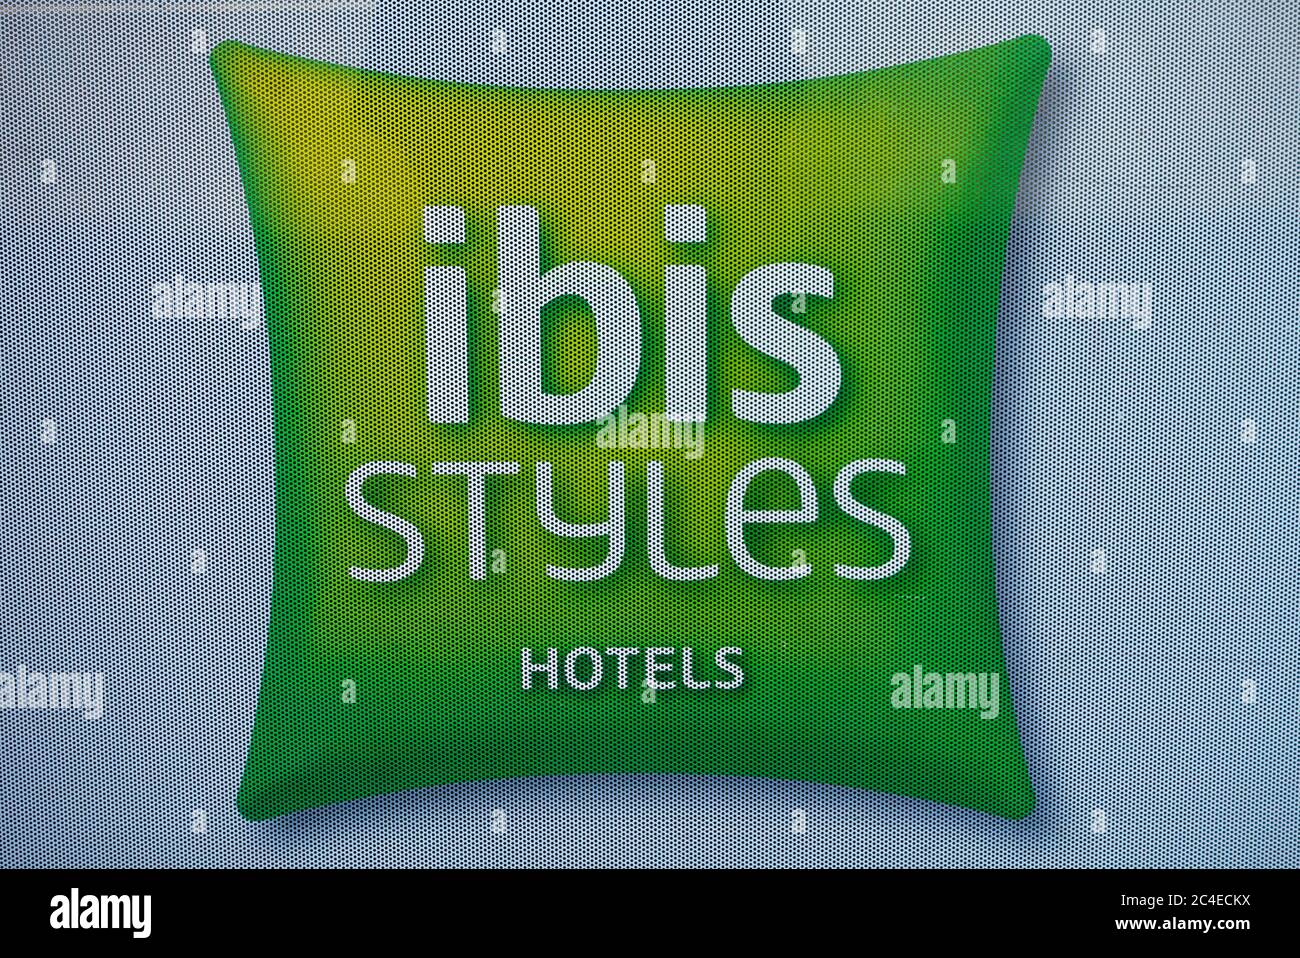 Ibis Styles Hotels logo in Liverpool Stock Photo